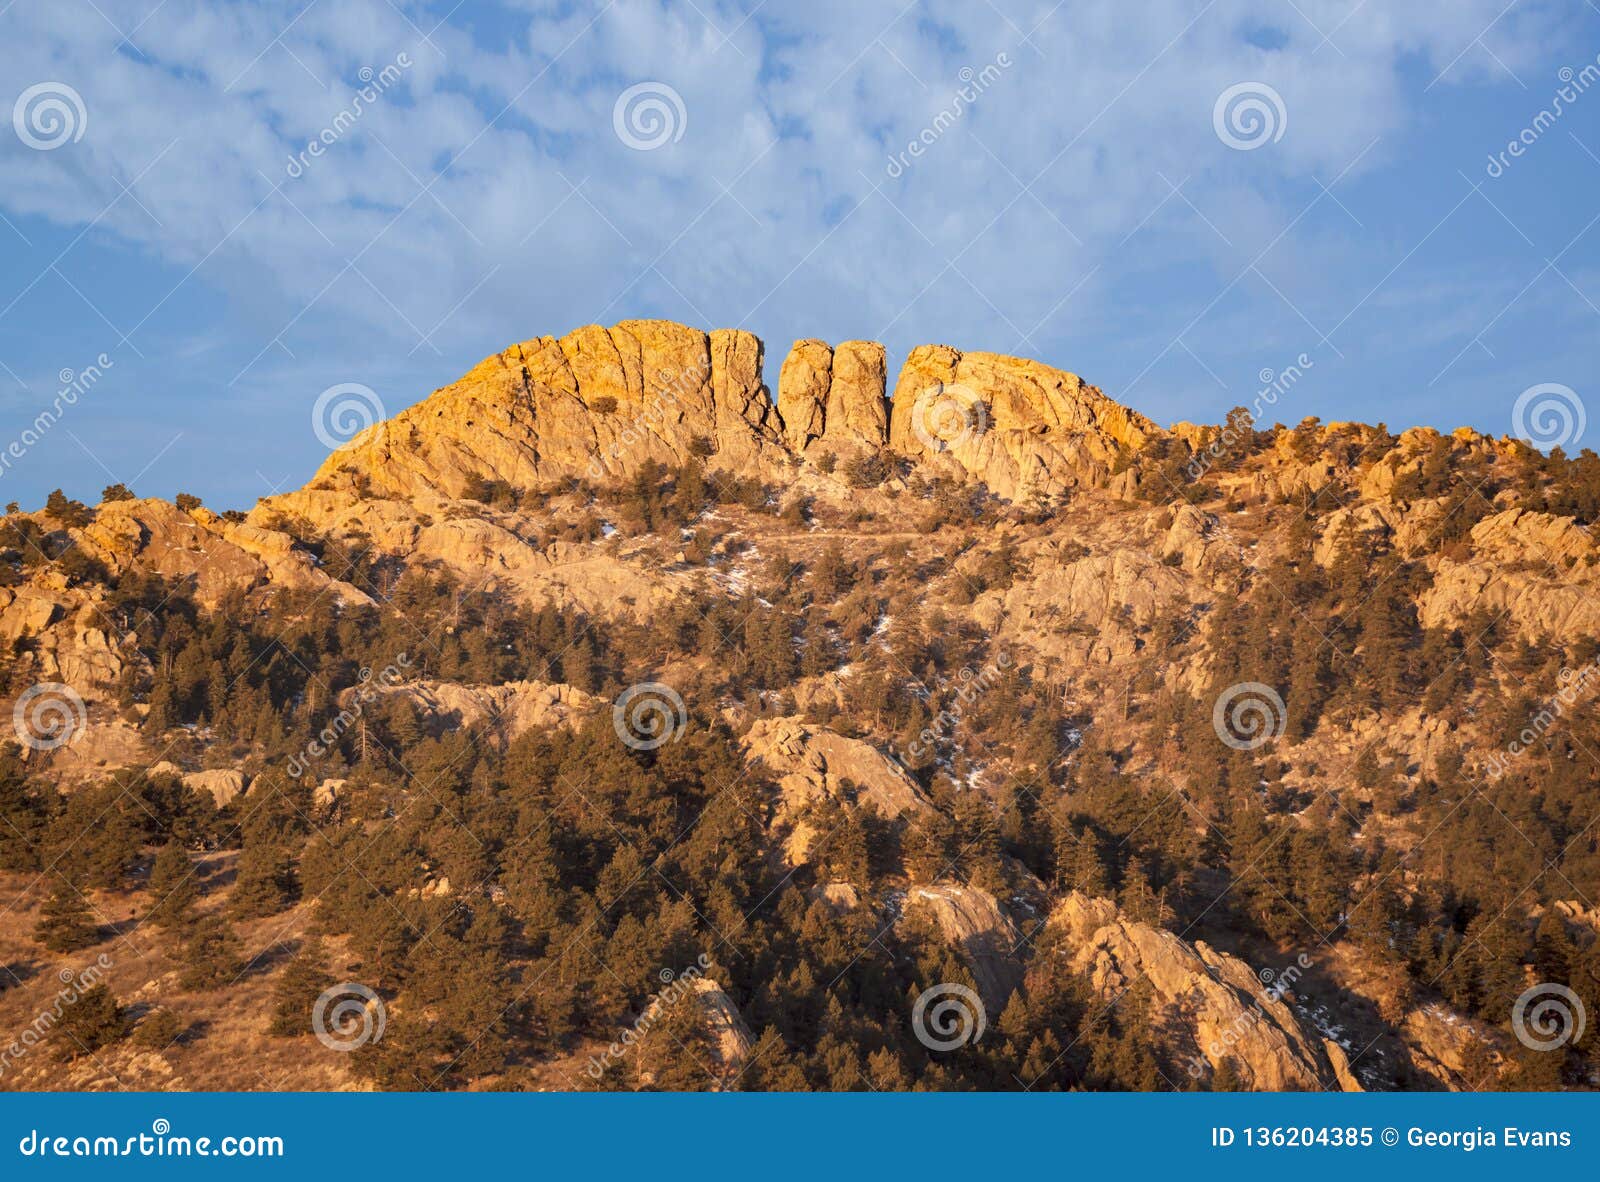 horsetooth rock formation at sunrise is a distinctive geological and popular mountain landmark overlooking fort collins,colorado